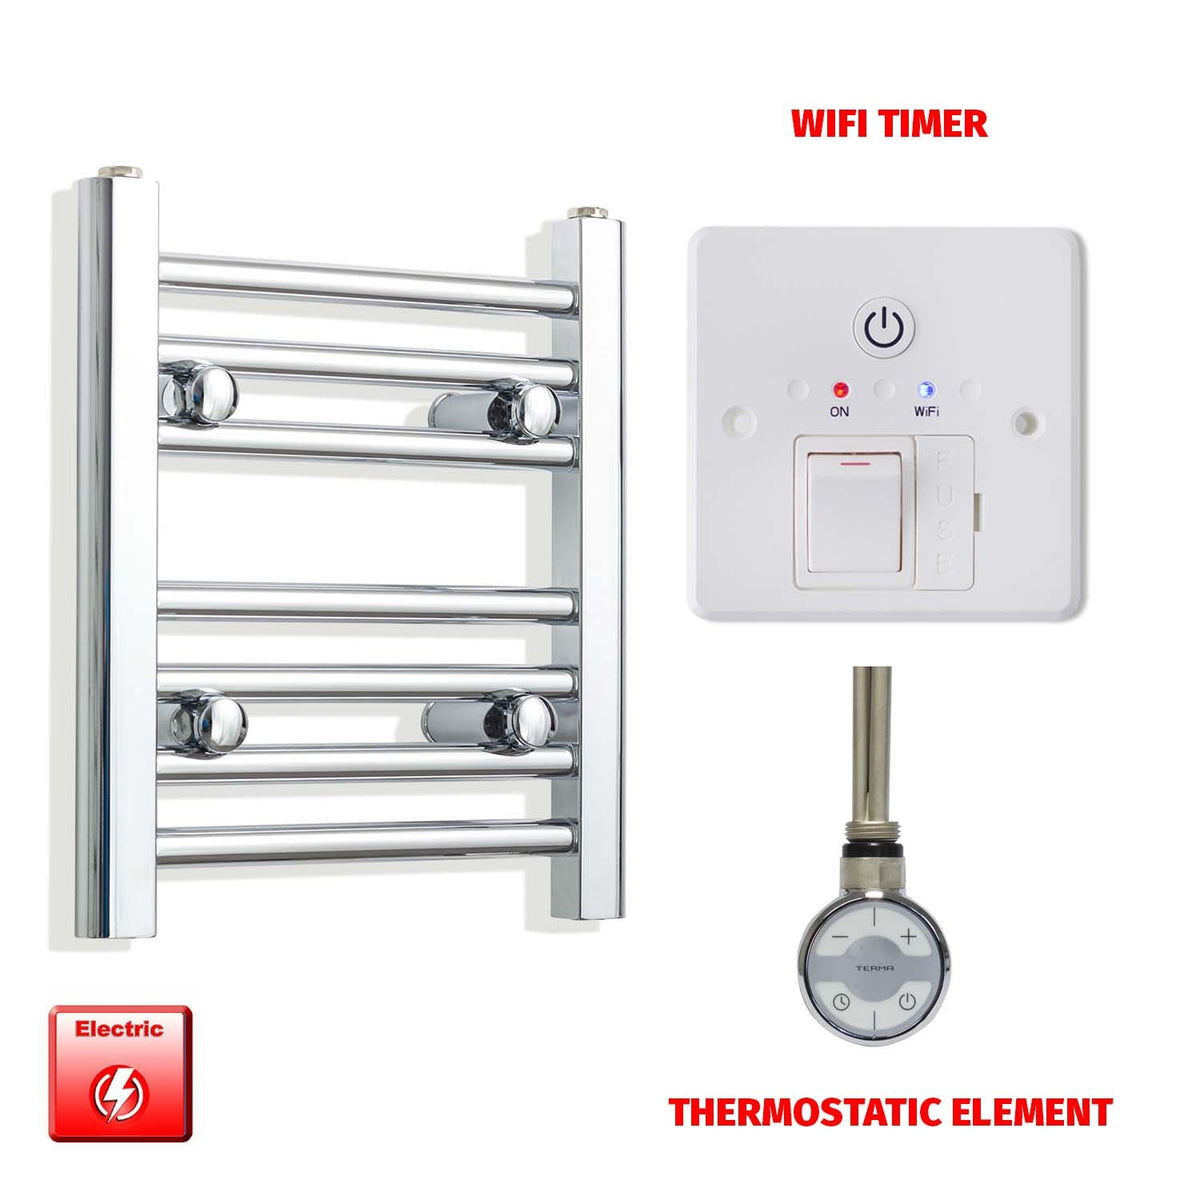 400mm High 350mm Wid Pre-Filled Electric Heated Towel Rail Radiator Straight Chrome MOA Thermostatic element Wifi timer